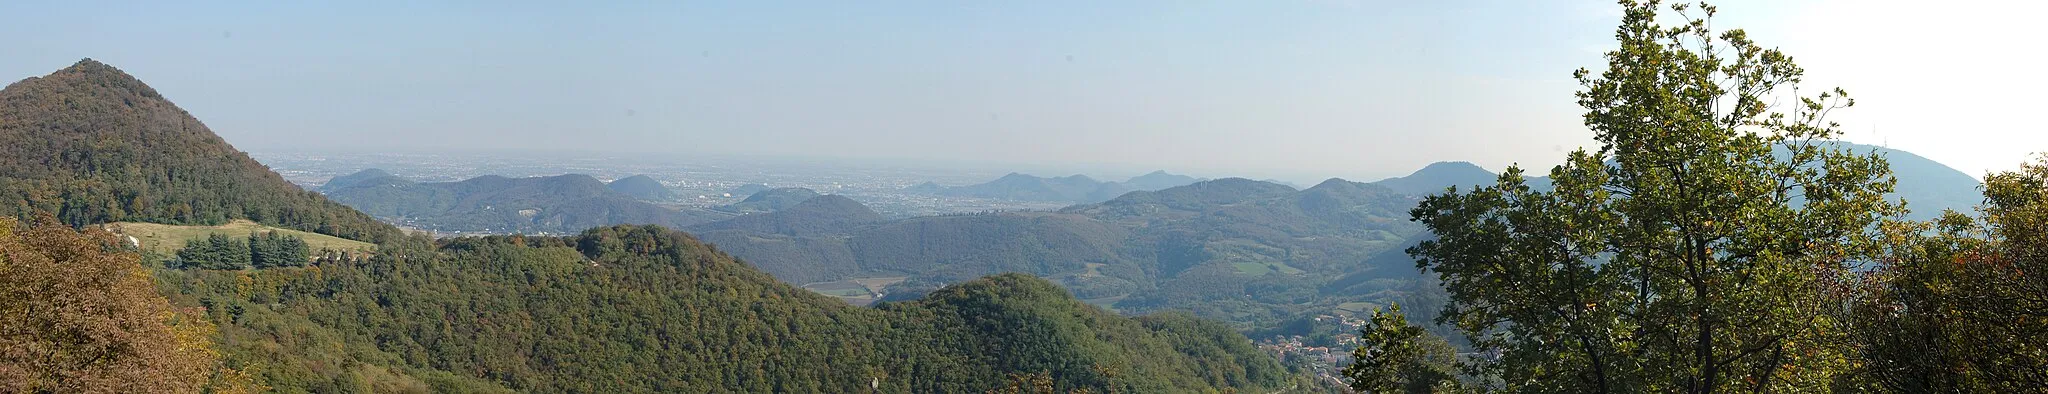 Photo showing: View across Colli Euganei from Monte della Madonna road towards southwest, with Teolo (Padova Province, Italy) in the valley (Panoramic stitched together from four images by means of ArcSoft Panorama Maker 4).